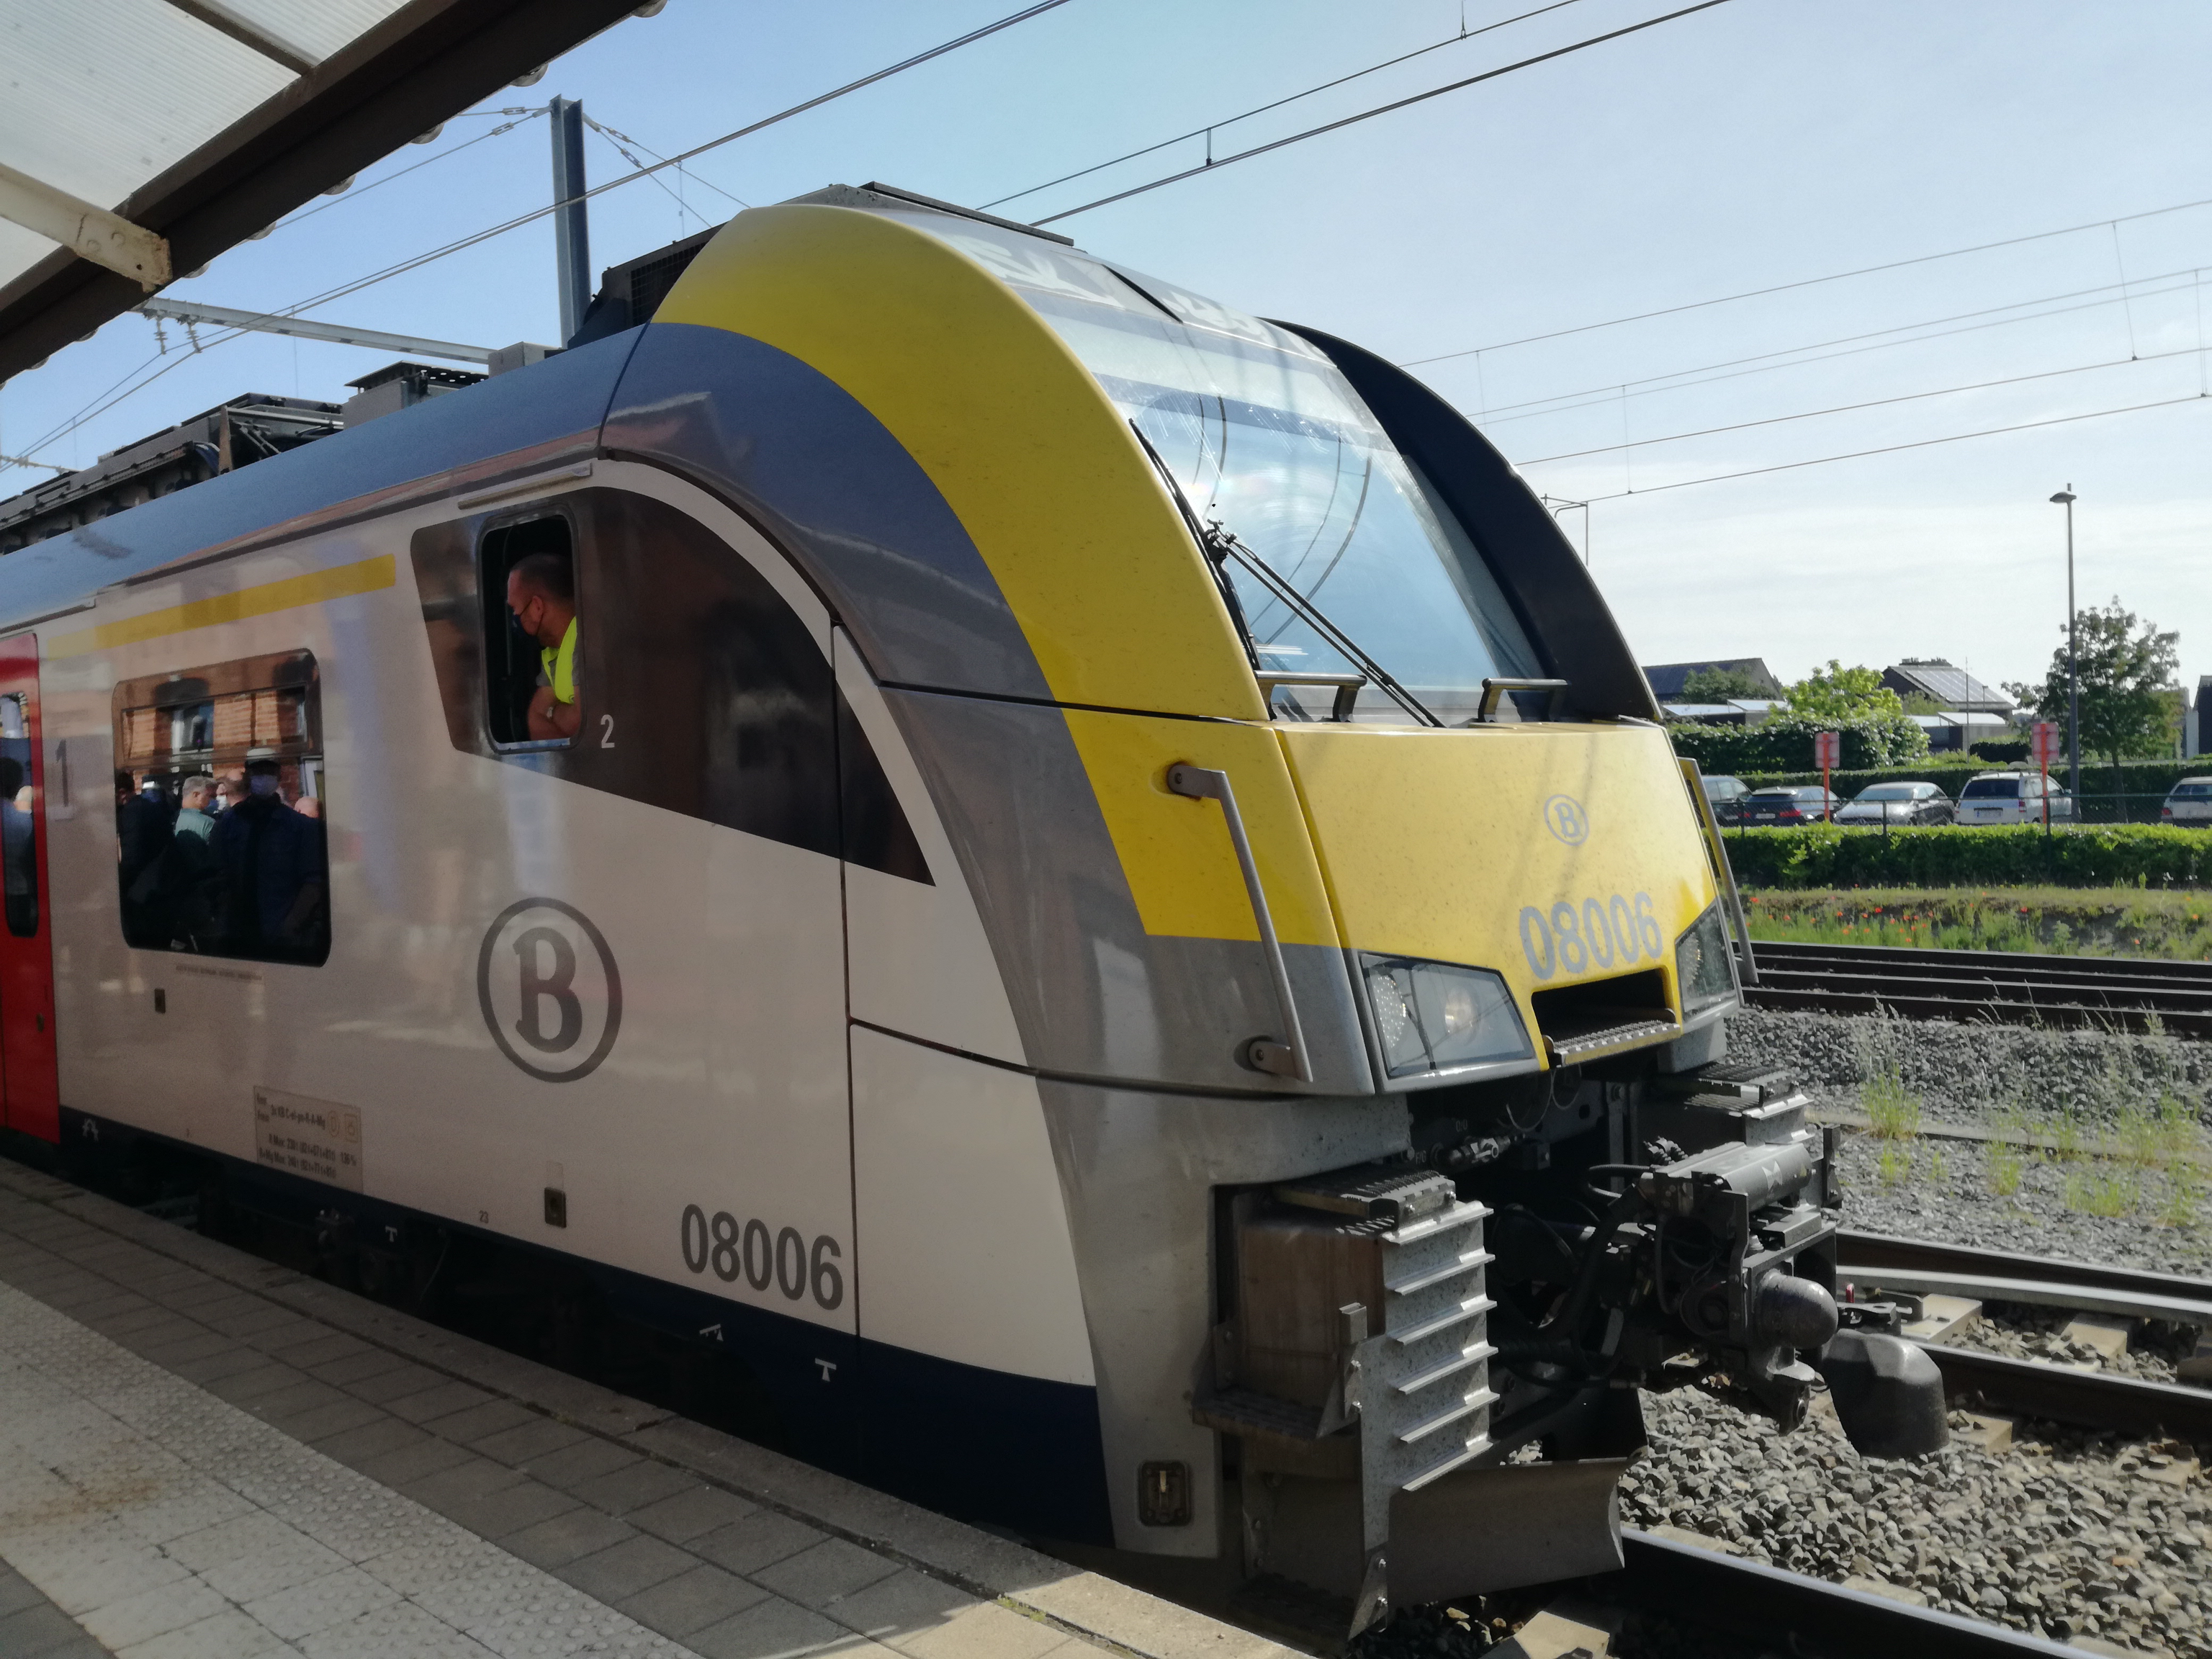 NMBS/SNCB’s monopoly fixed for another ten years